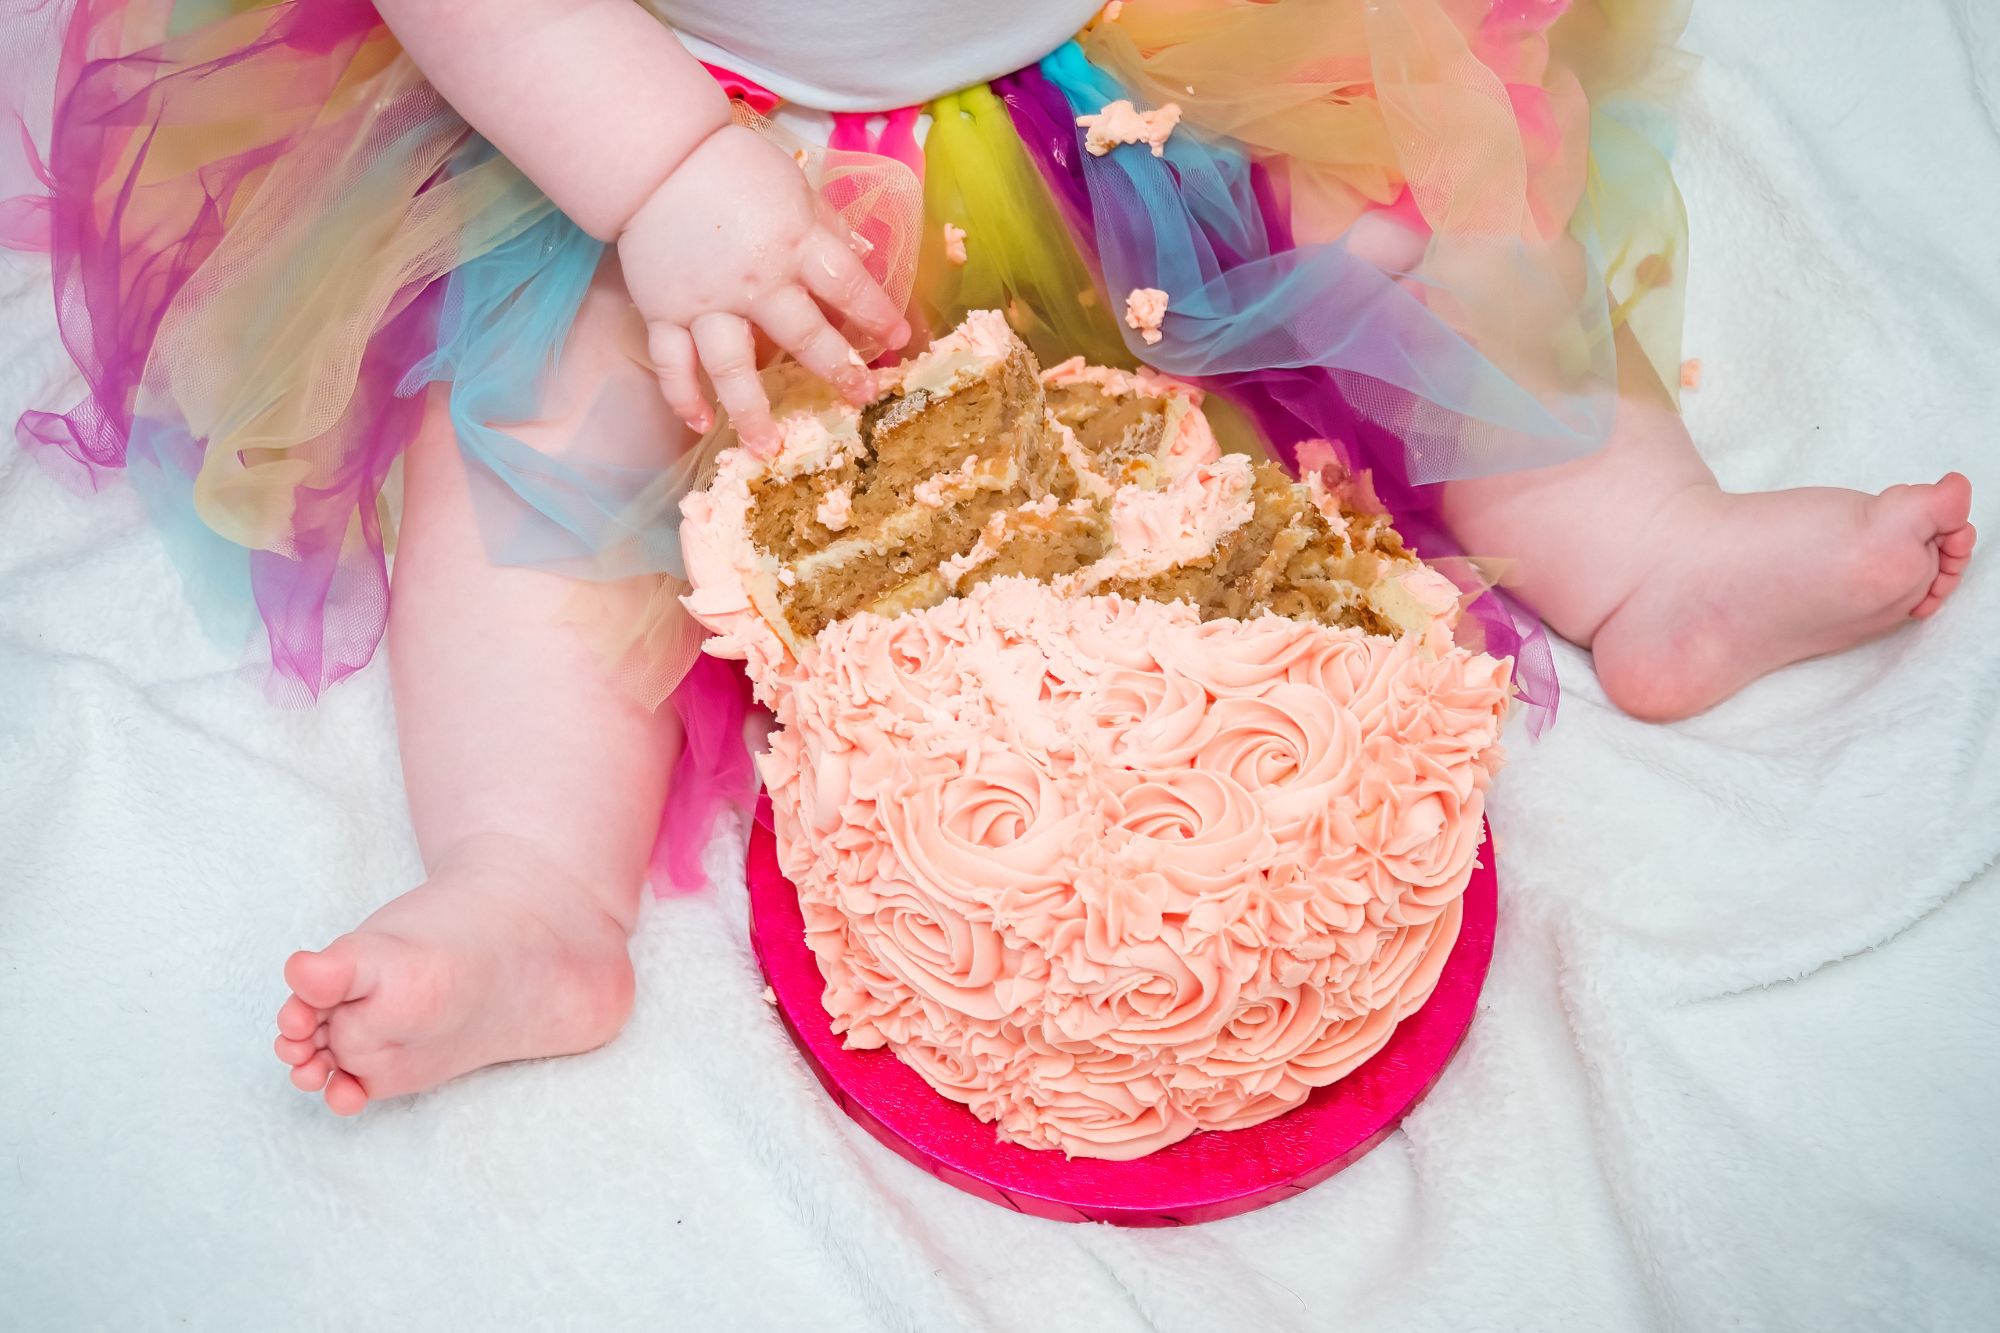 A little girl sits with her birthday cake between her legs and has just pulled off a large chunk ready to eat